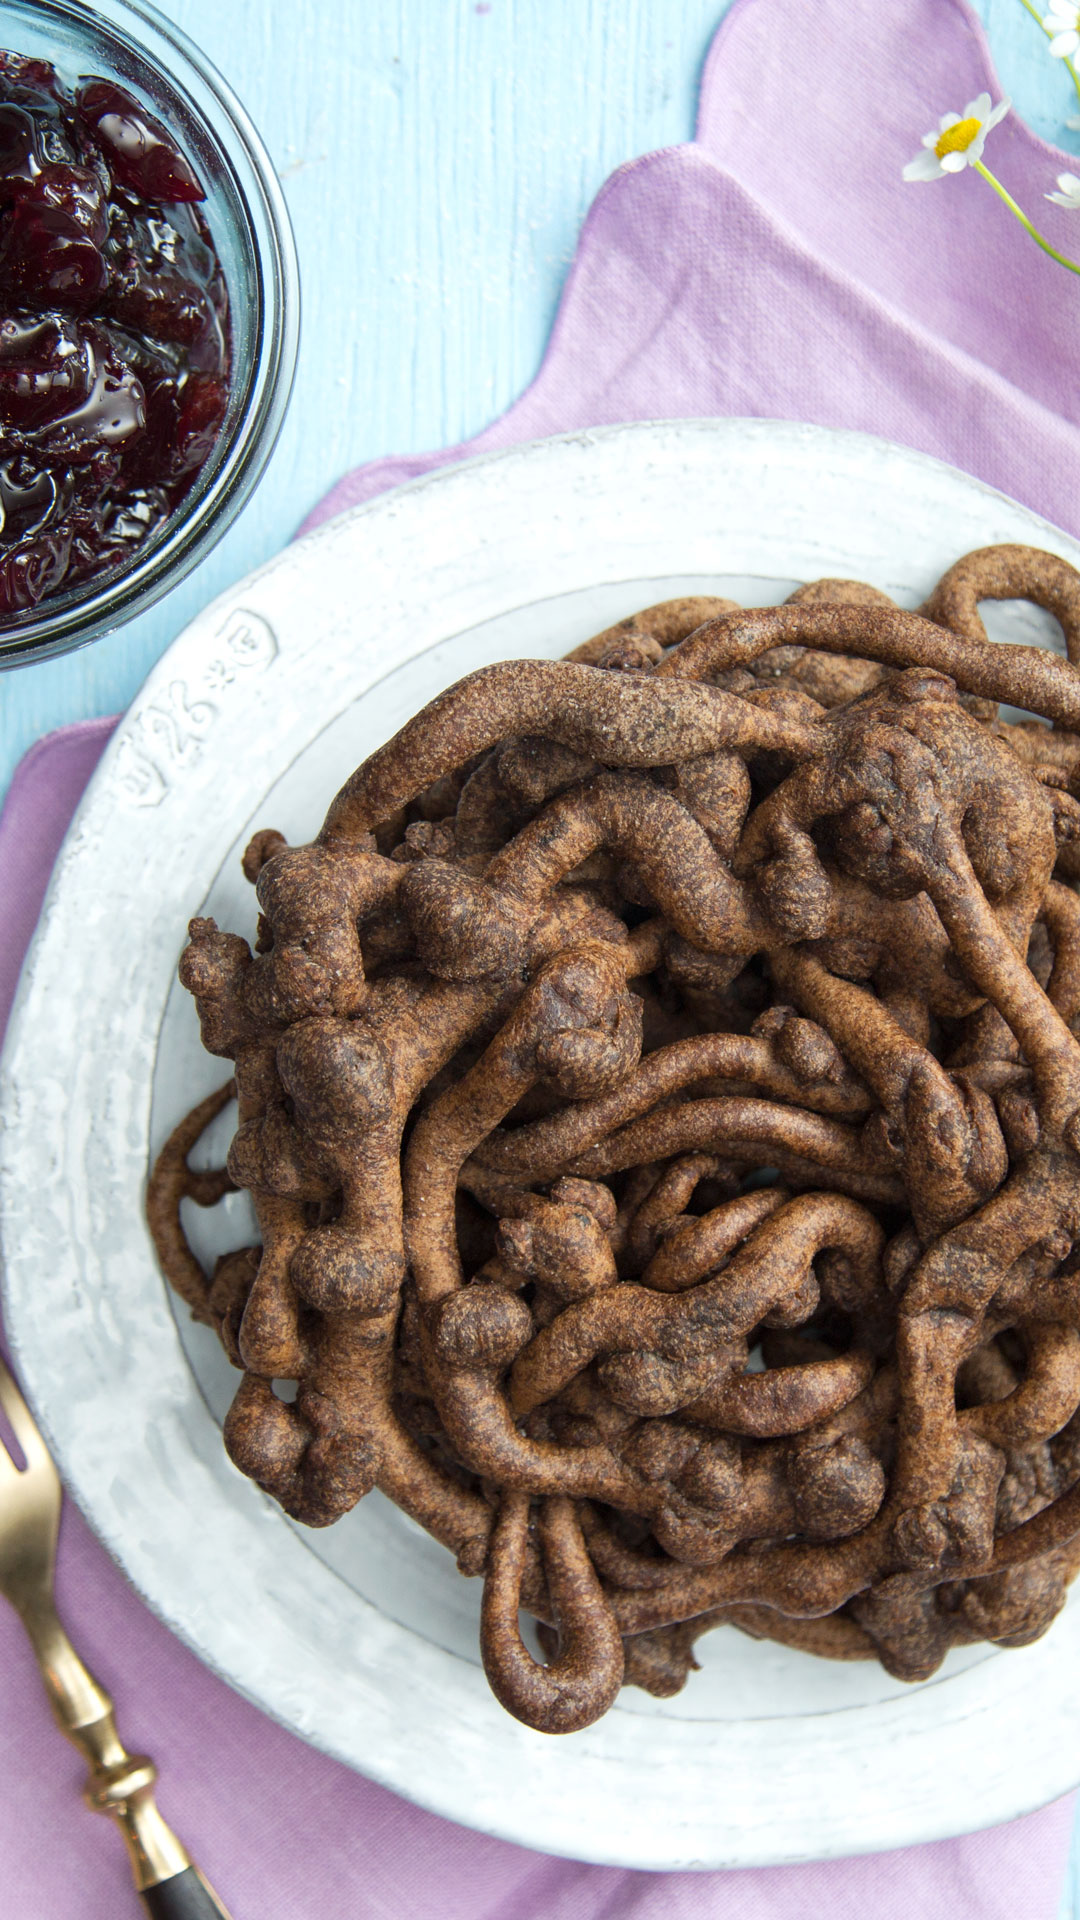 Chocolate Funnel Cake With Cherry Compote